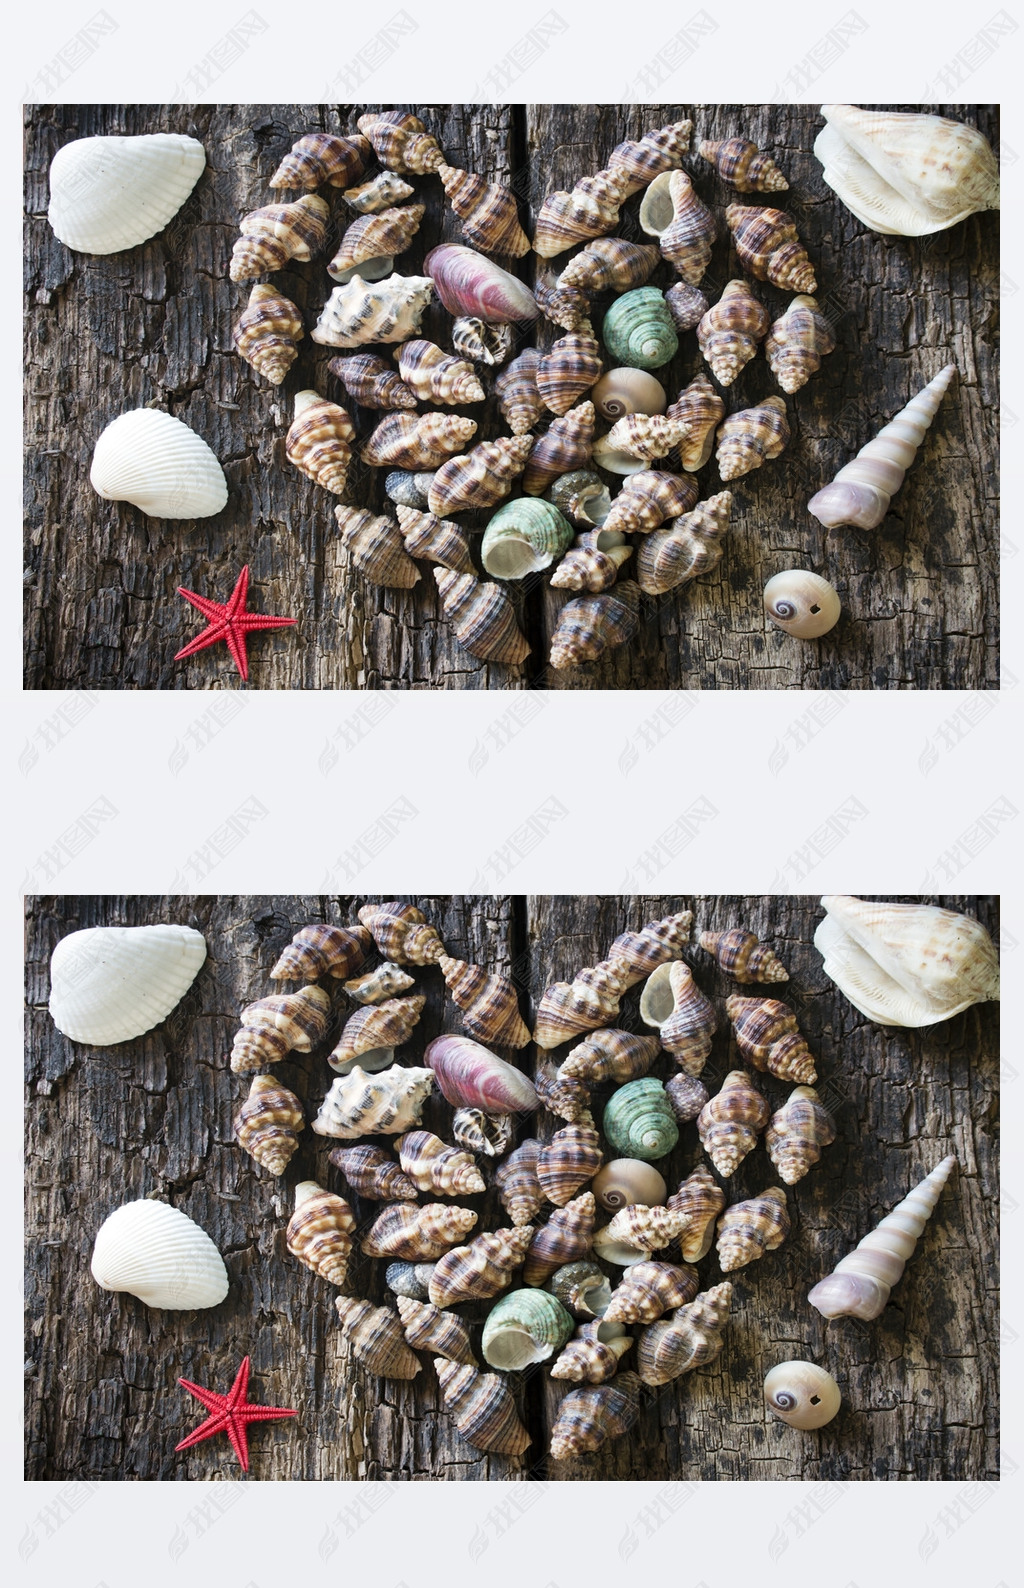 Heart of seashells and starfish on wooden background